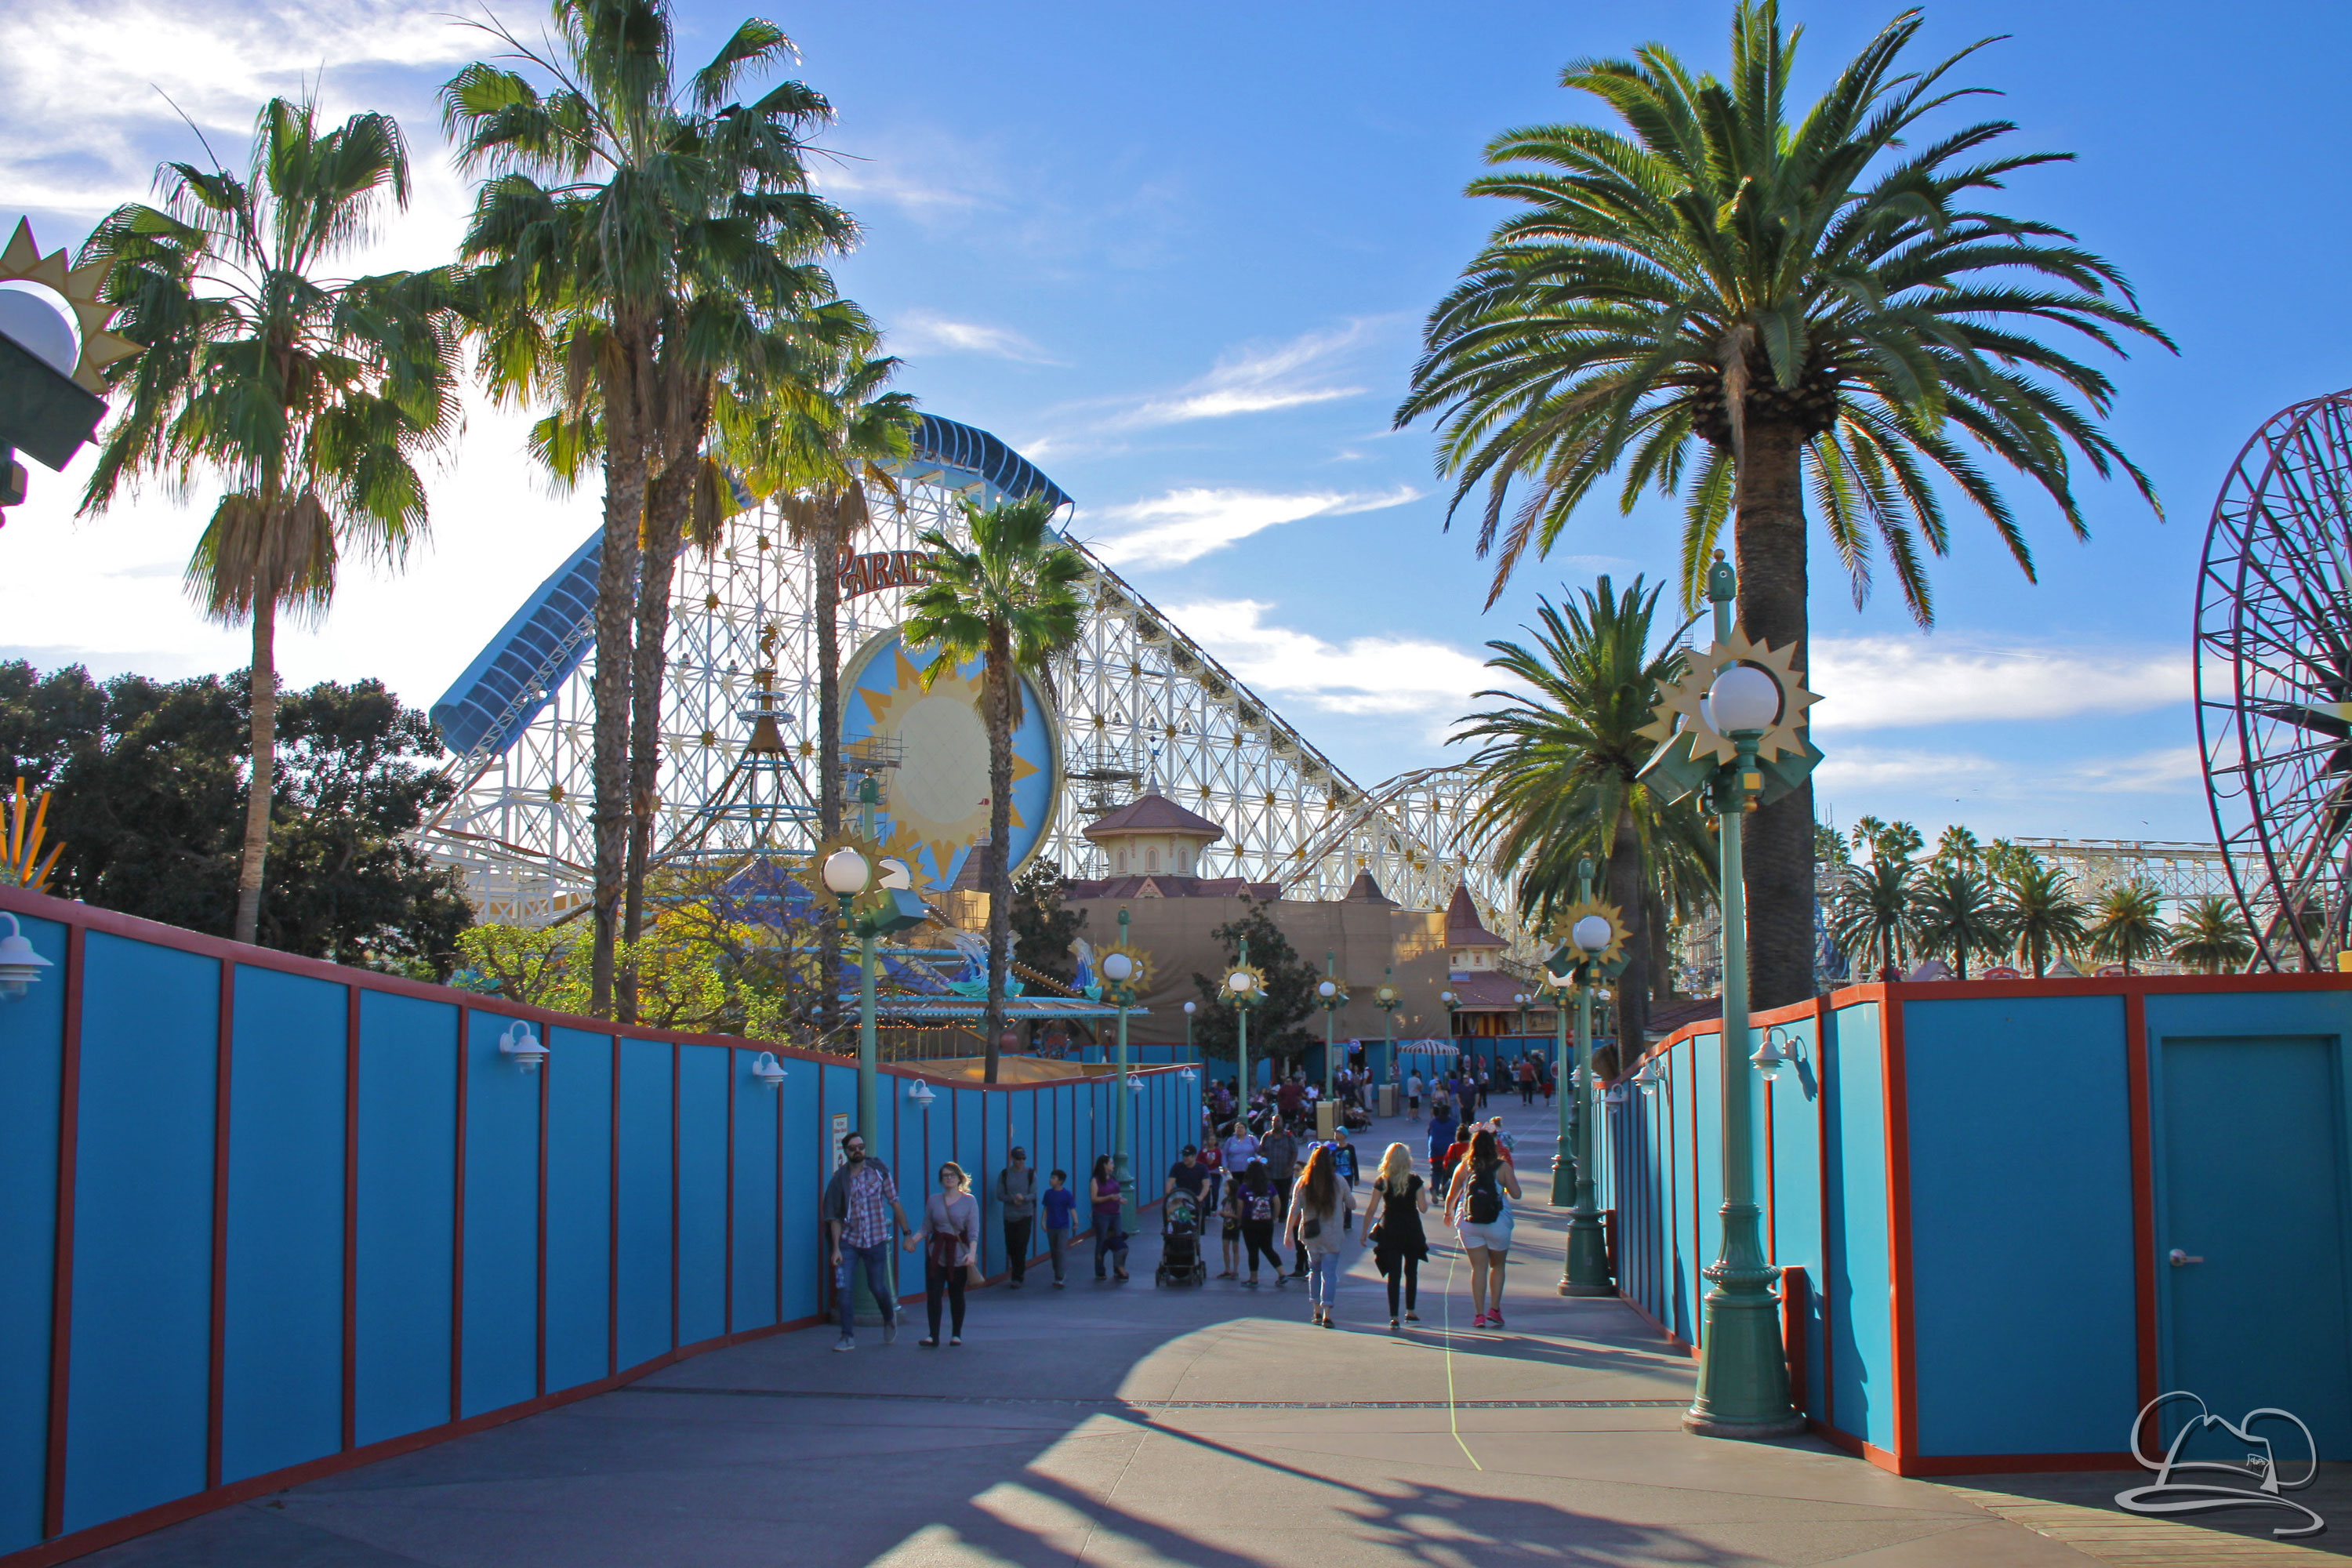 Walls of Change – Why The Disneyland Resort Only Gets Better With Them